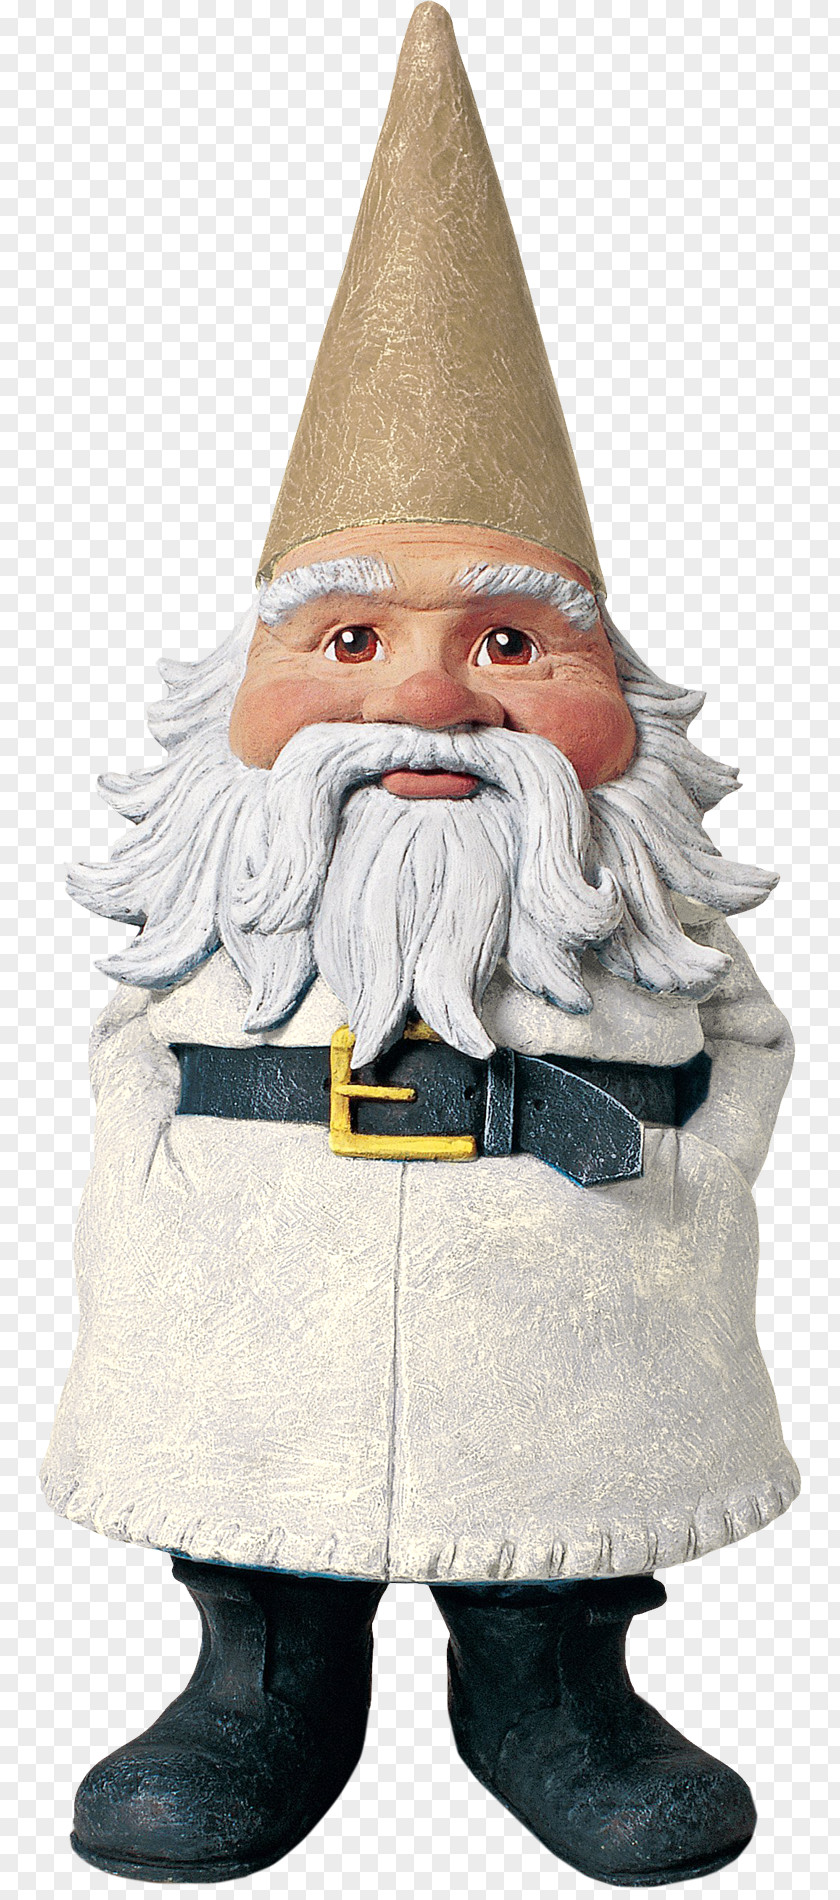 Kind Cute Santa Claus Garden Gnome Where Is My Gnome? Travelocity PNG